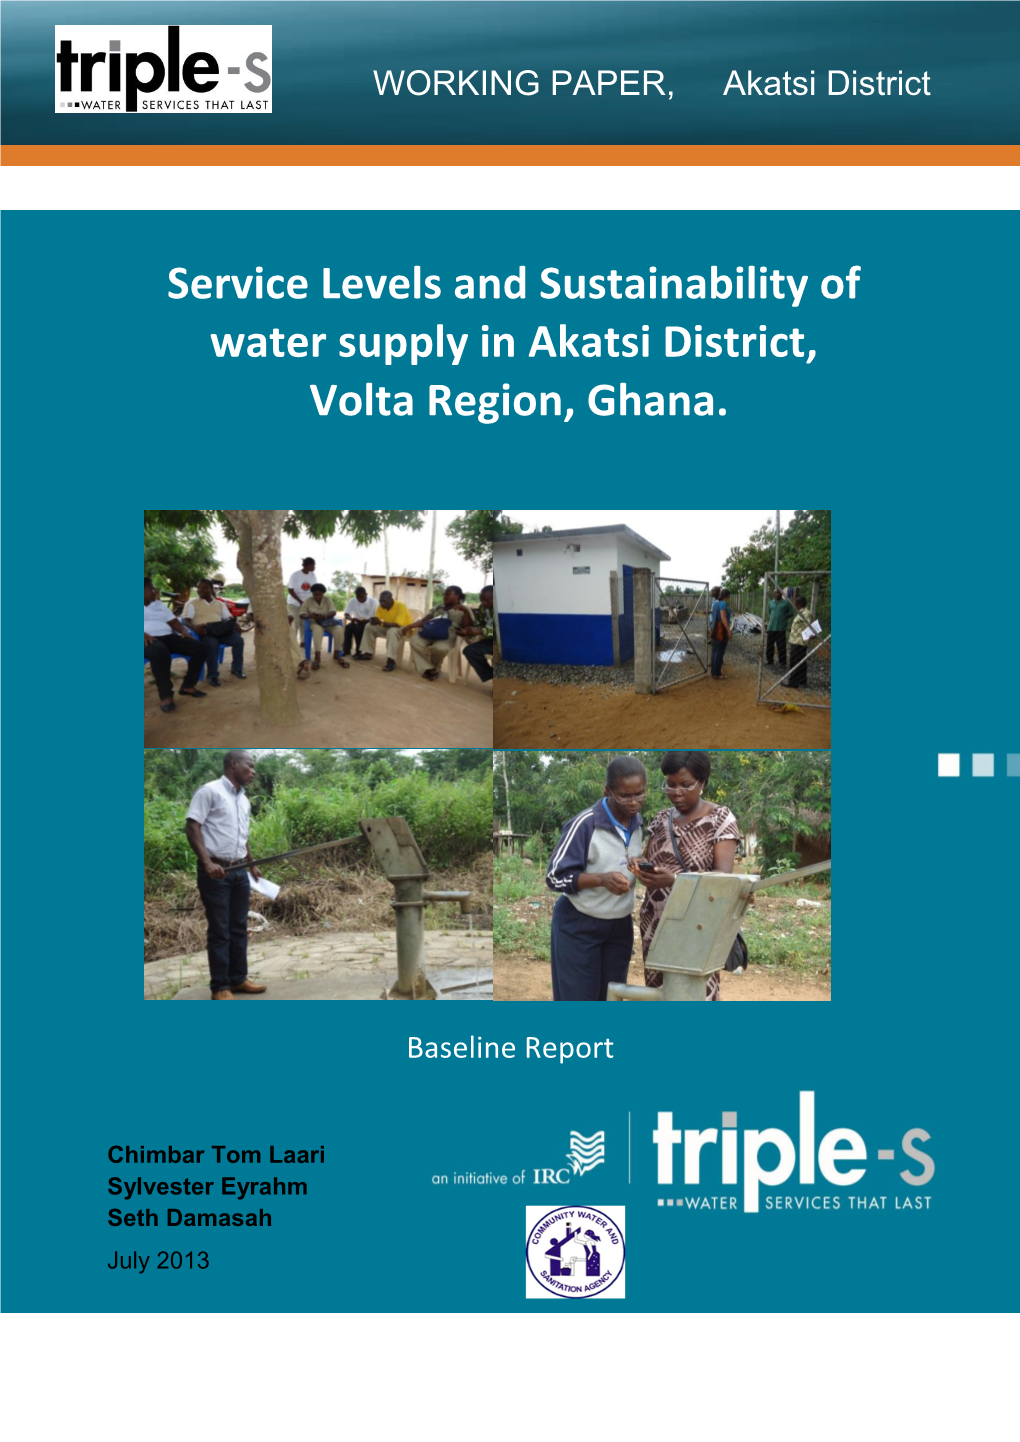 Service Levels and Sustainability of Water Supply in Akatsi District, Volta Region, Ghana